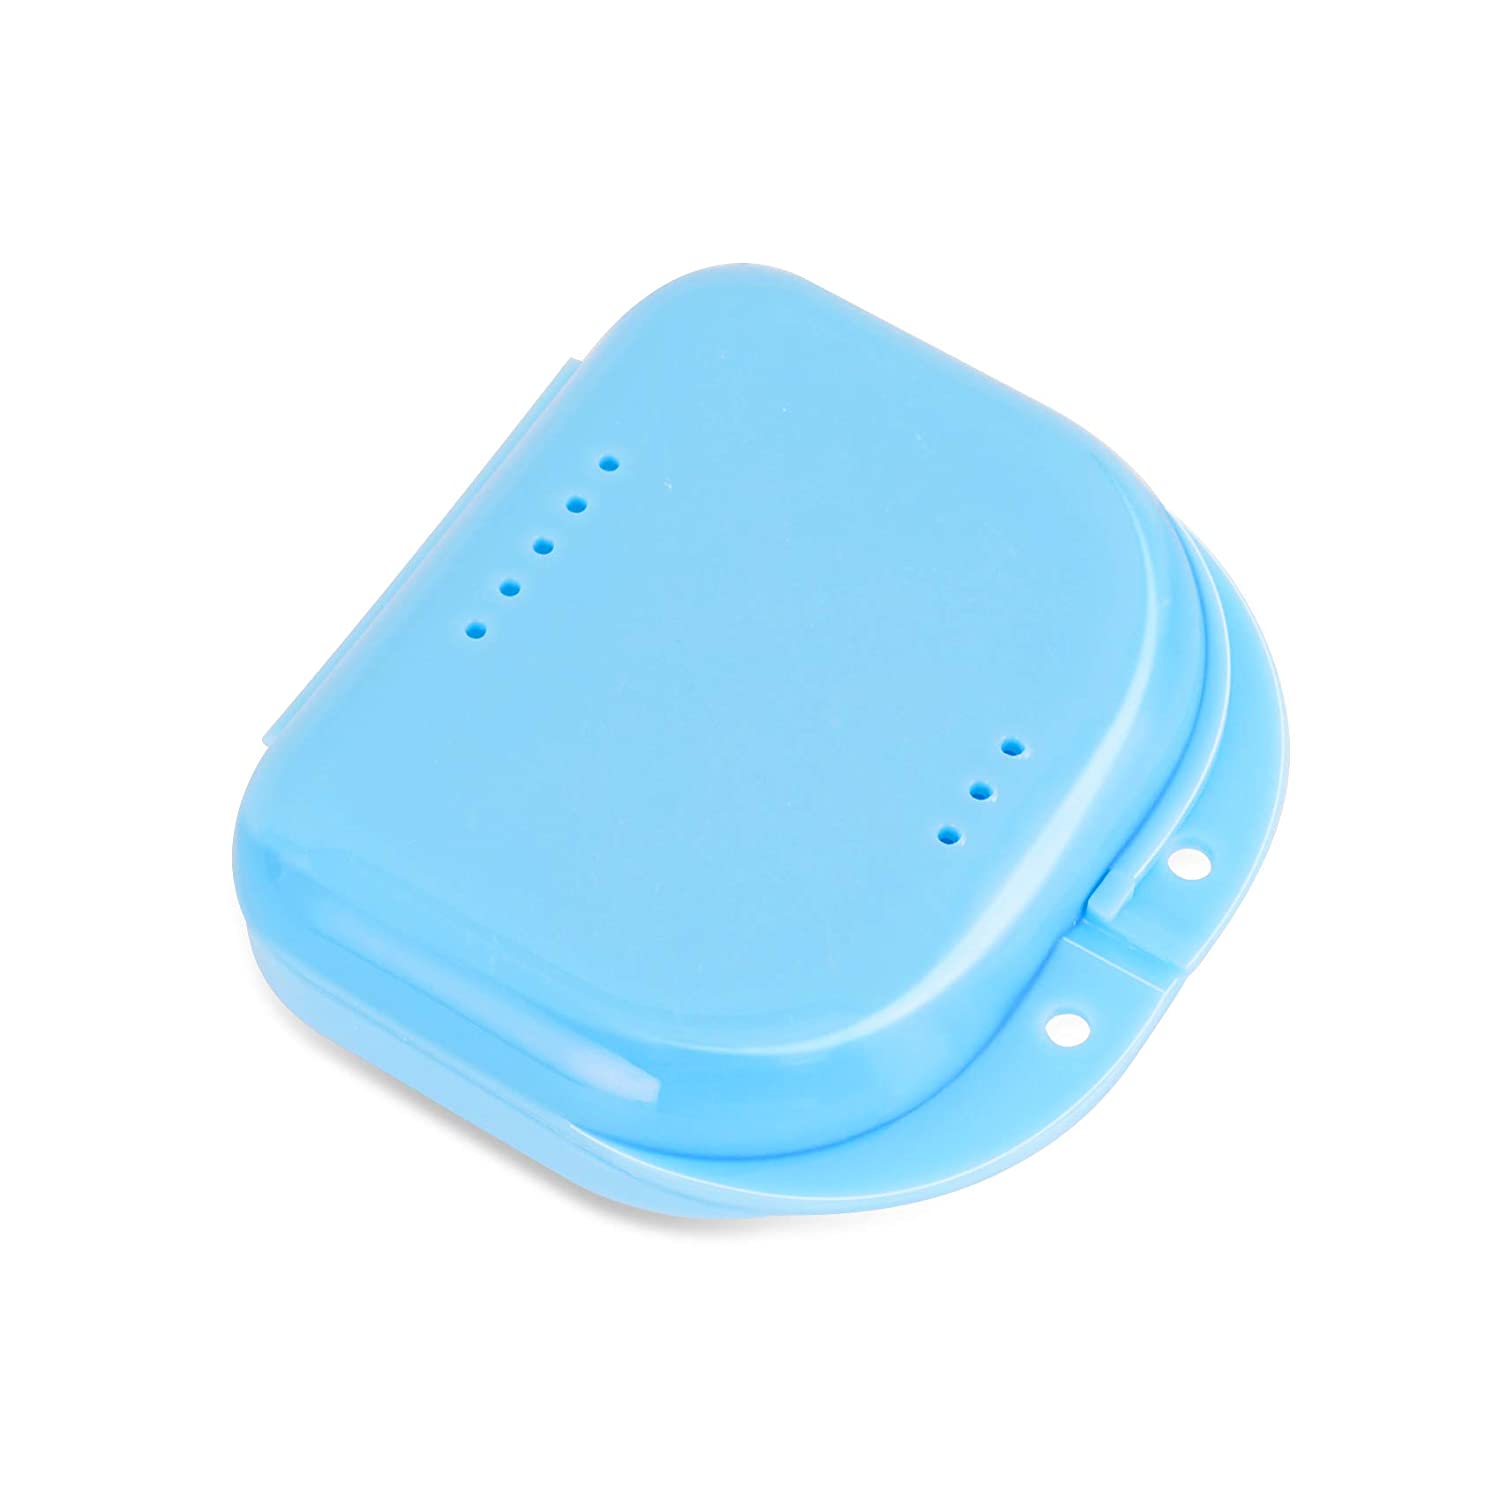 Retainer case with vent hole